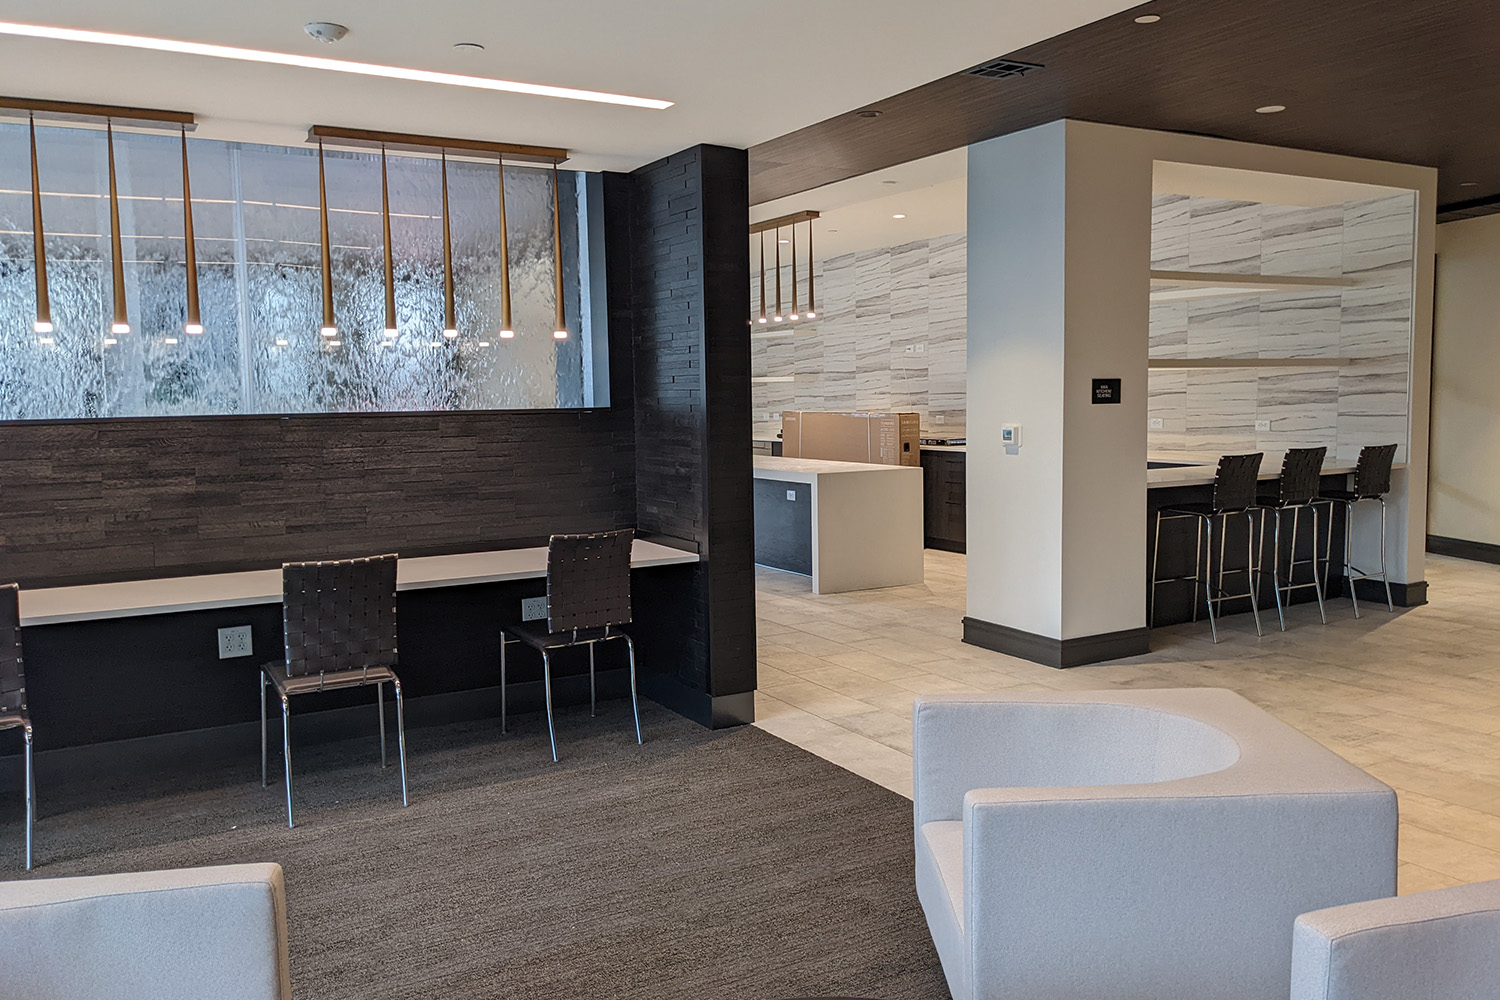 Flats on First's indoor amenities on ground floor. There is a water feature near a bar area, full kitchen, and ample seating. The exercise room is off to the left.